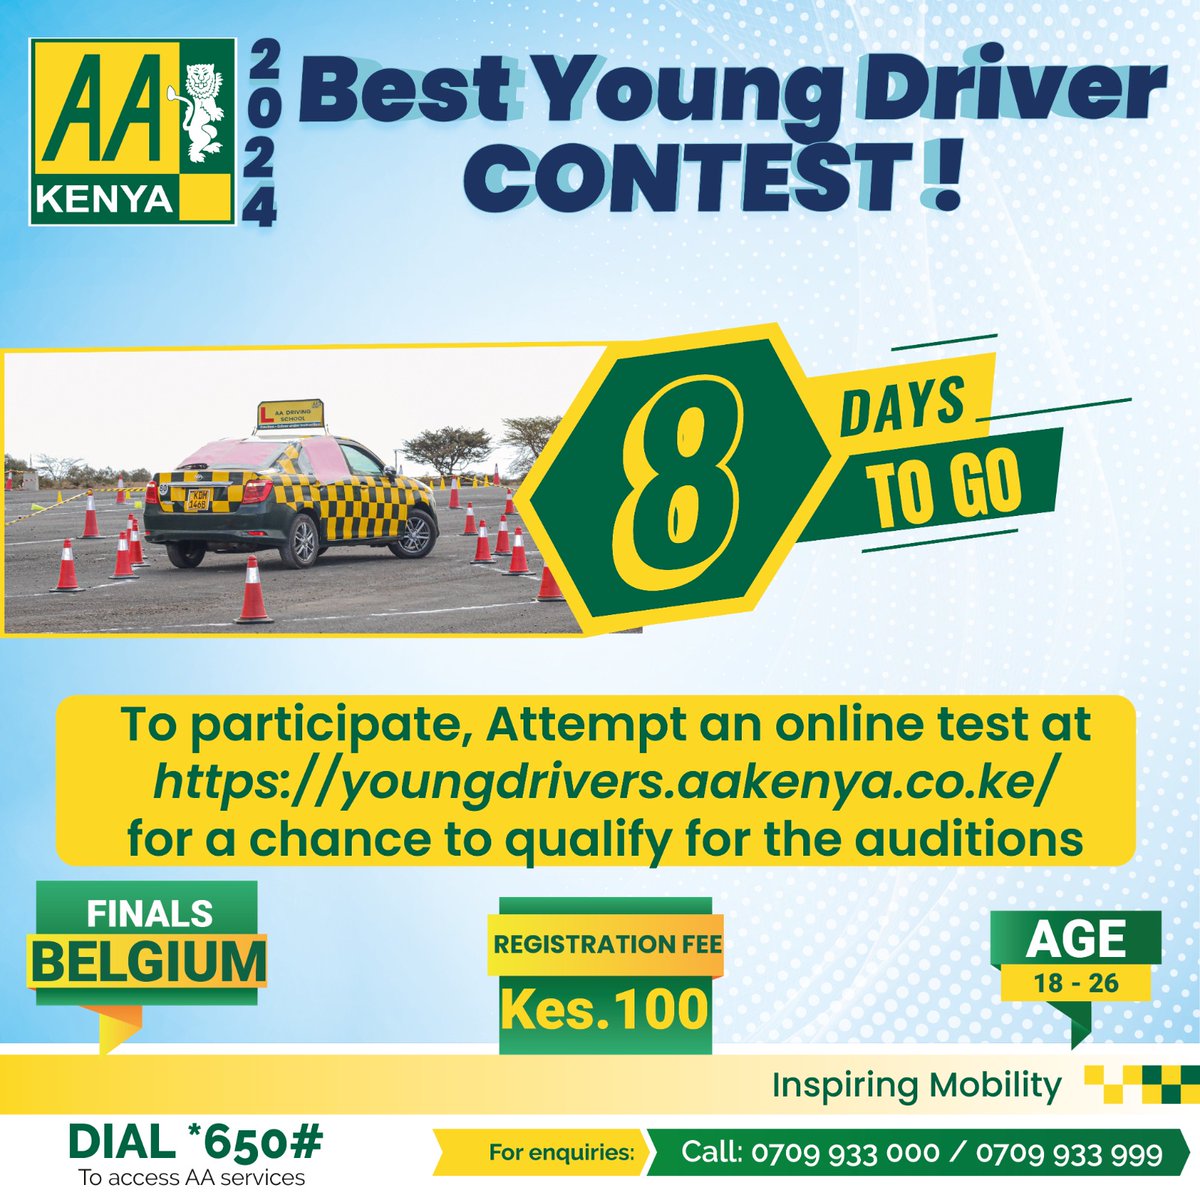 Bado siku nane! Je? Umejisajili? Sign up and take the test at youngdrivers.aakenya.co.ke to qualify for the auditions! Two winners will compete with global champions in Belgium, with incredible prizes for the top 10 winners. Tag your friends. #AAKenyacares #BestYoungDriver2024